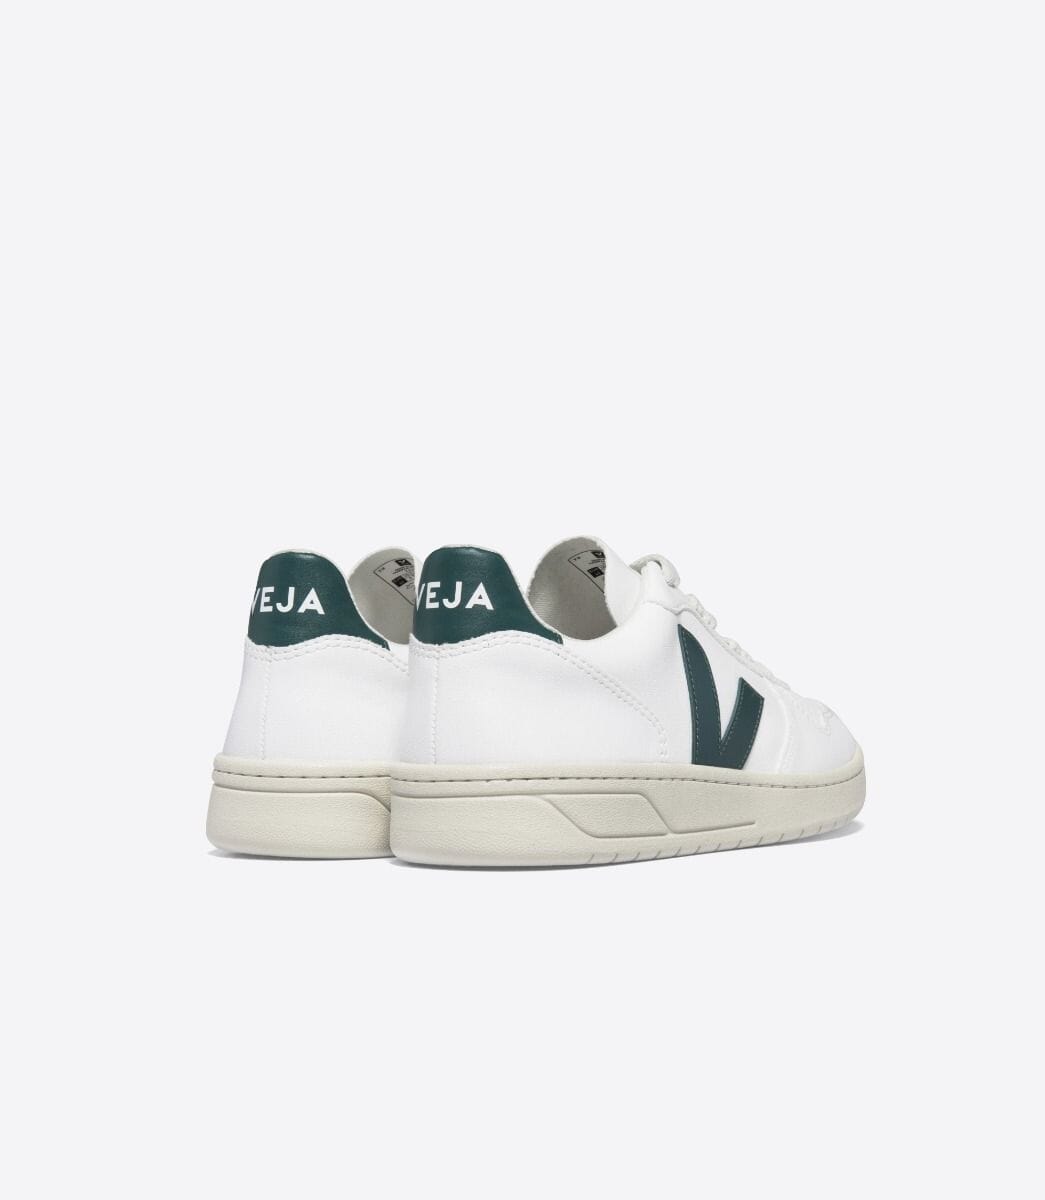 Veja - M's V-10 CWL - Cotton Worked as Leather - Weekendbee - sustainable sportswear